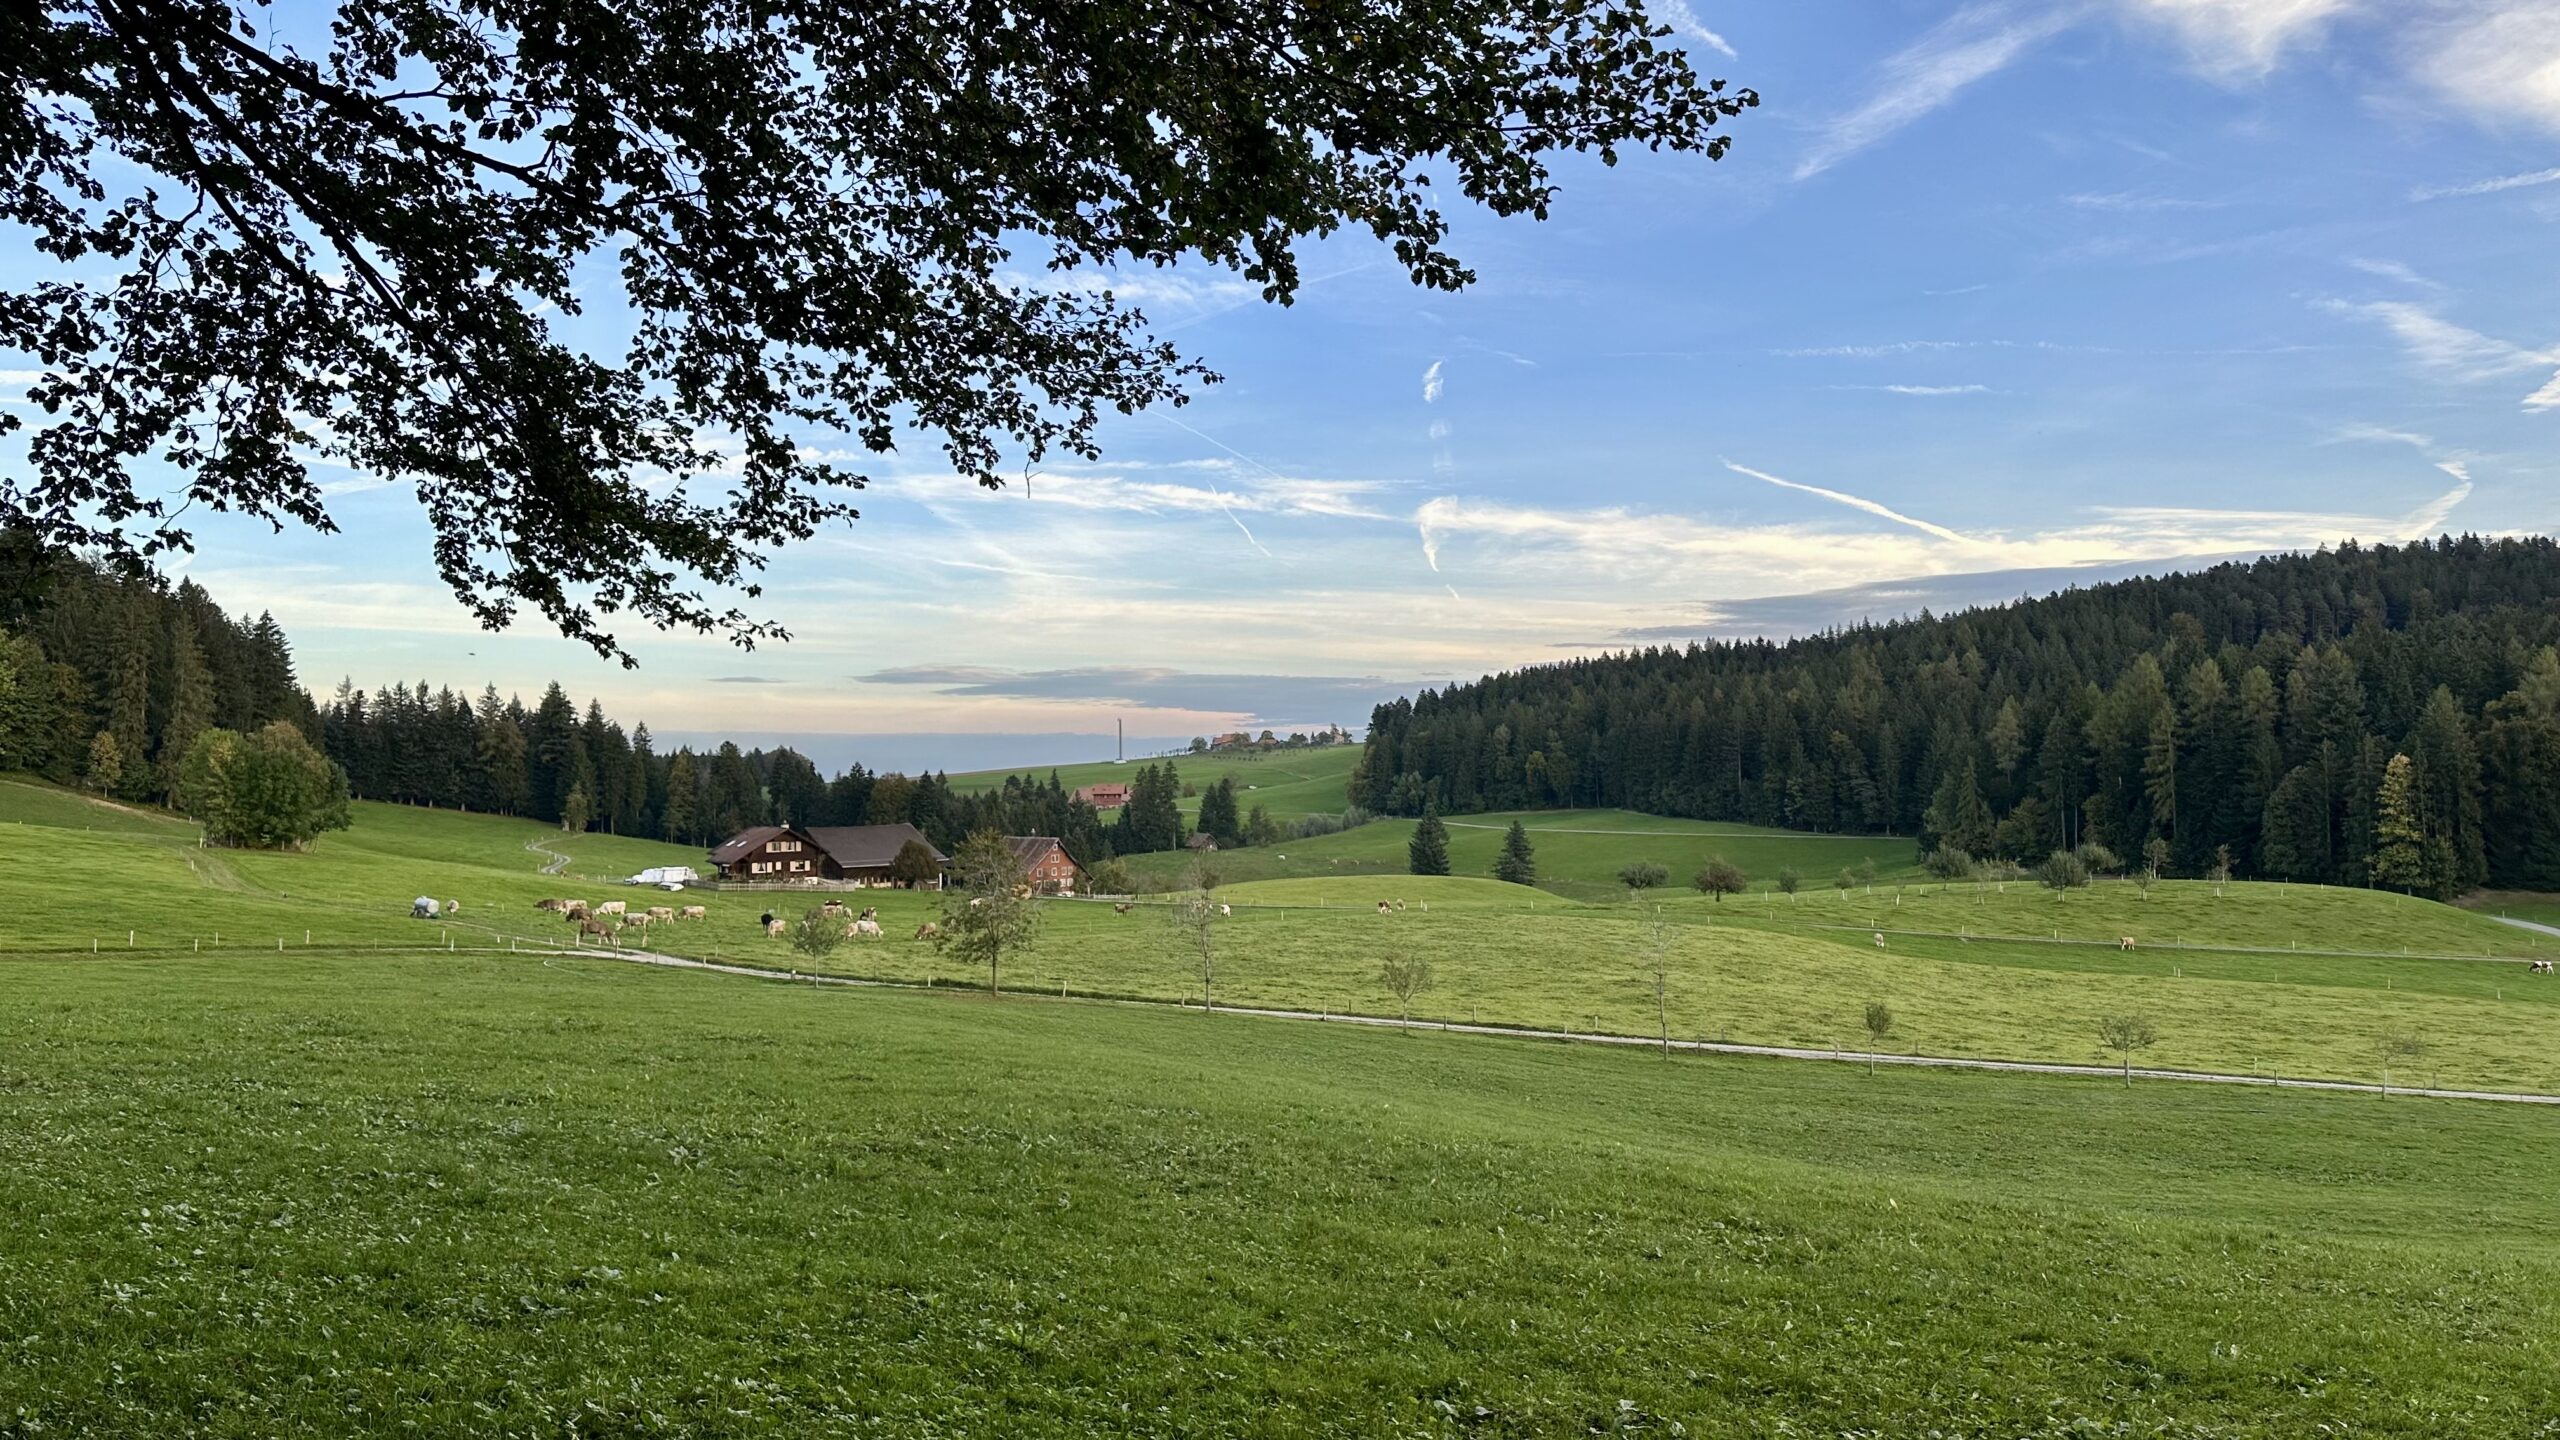 View of the rolling Swiss pastures of Hinterwyden with green grass, cows, and some farm houses.